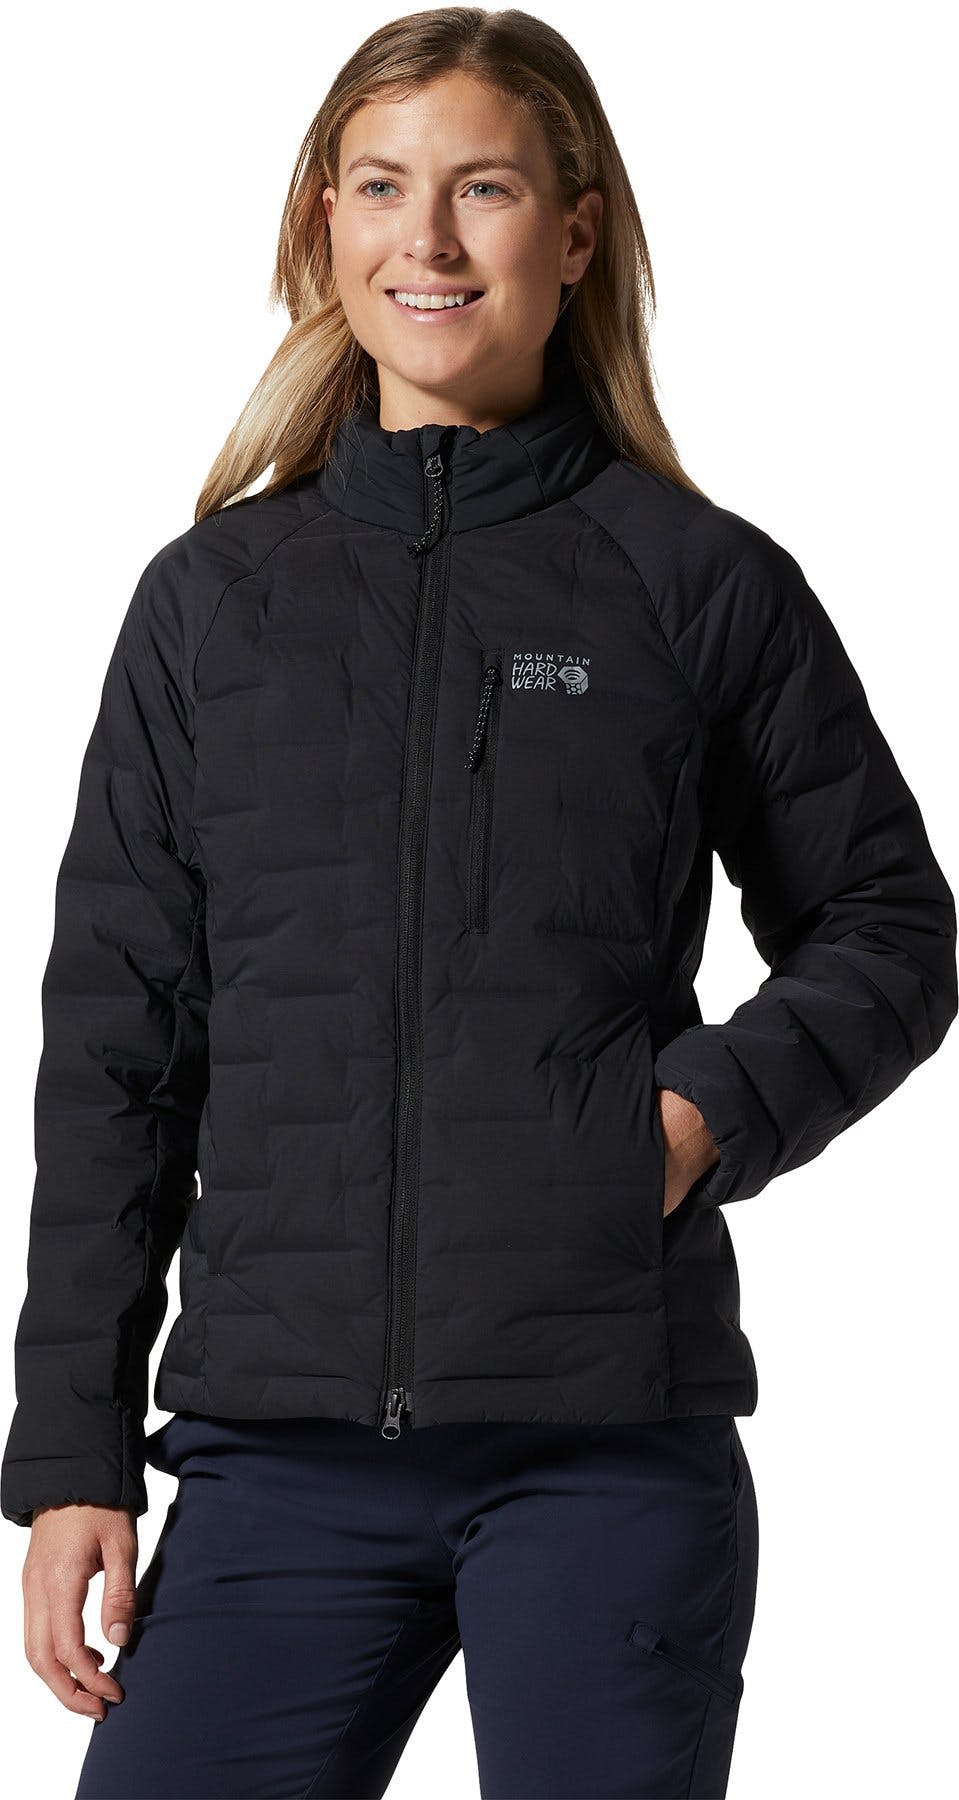 Product image for Stretchdown Jacket - Women's